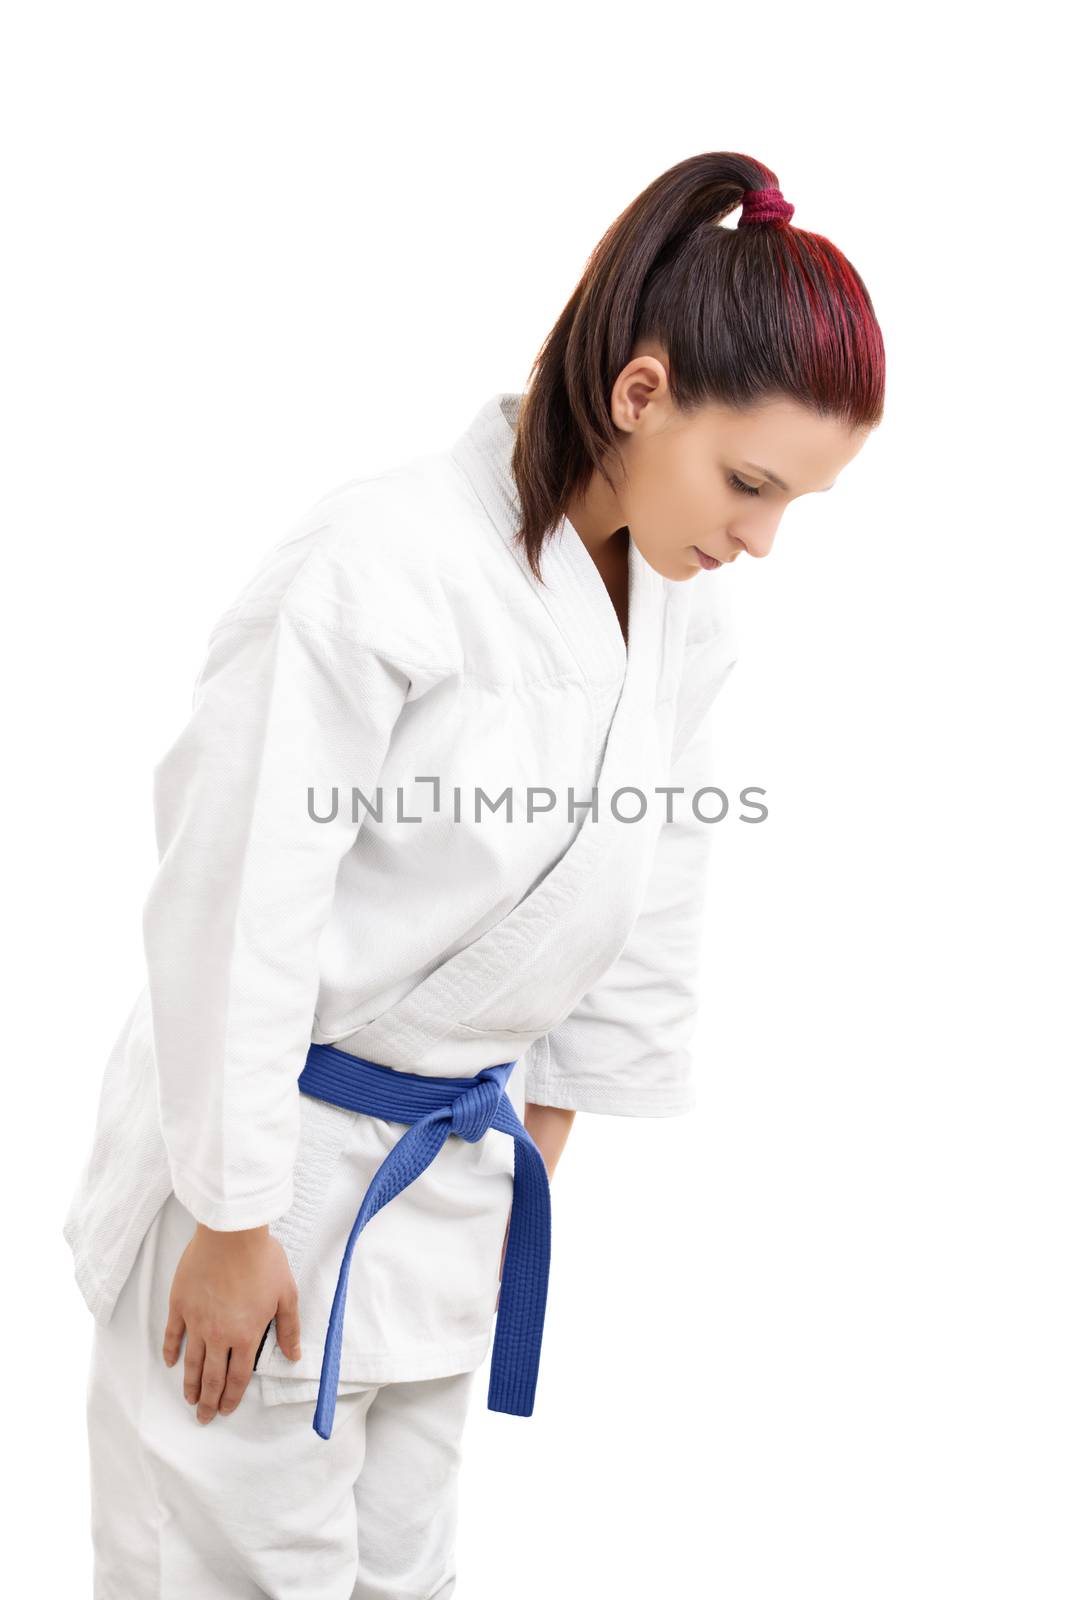 Portrait of a young girl in a white kimono with blue belt bowing, isolated on white background.